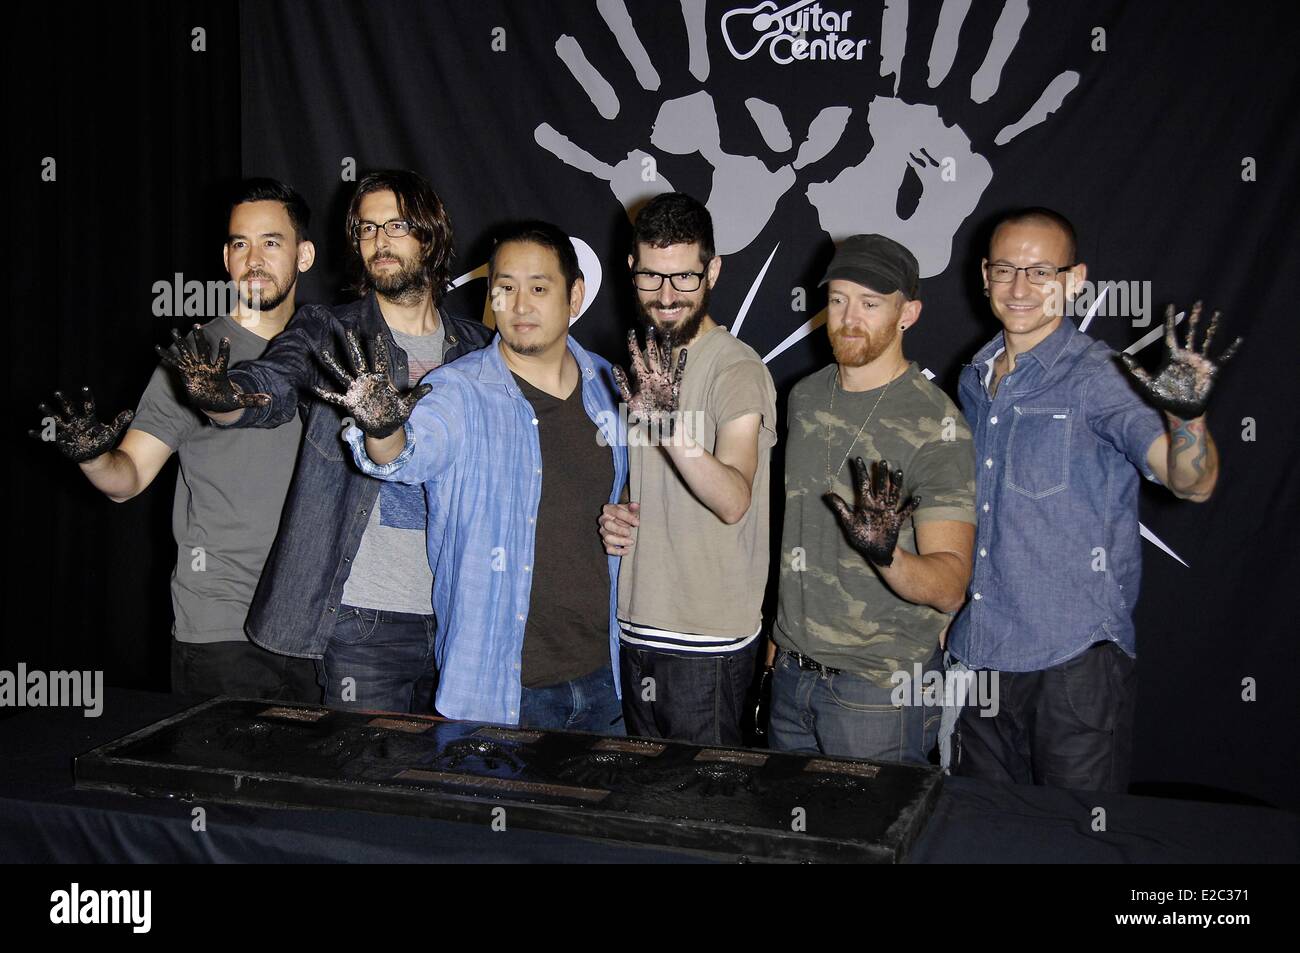 Los Angeles, CA, USA. 18th June, 2014. Mike Shinoda, Rob Bourdon, Joe Hahn, Brad Delson, Dave Phoenix Farrell, Chester Bennington at the induction ceremony for Guitar Center RockWalk Inducts Linkin Park, Sunset Boulevard, Los Angeles, CA June 18, 2014. Credit:  Michael Germana/Everett Collection/Alamy Live News Stock Photo